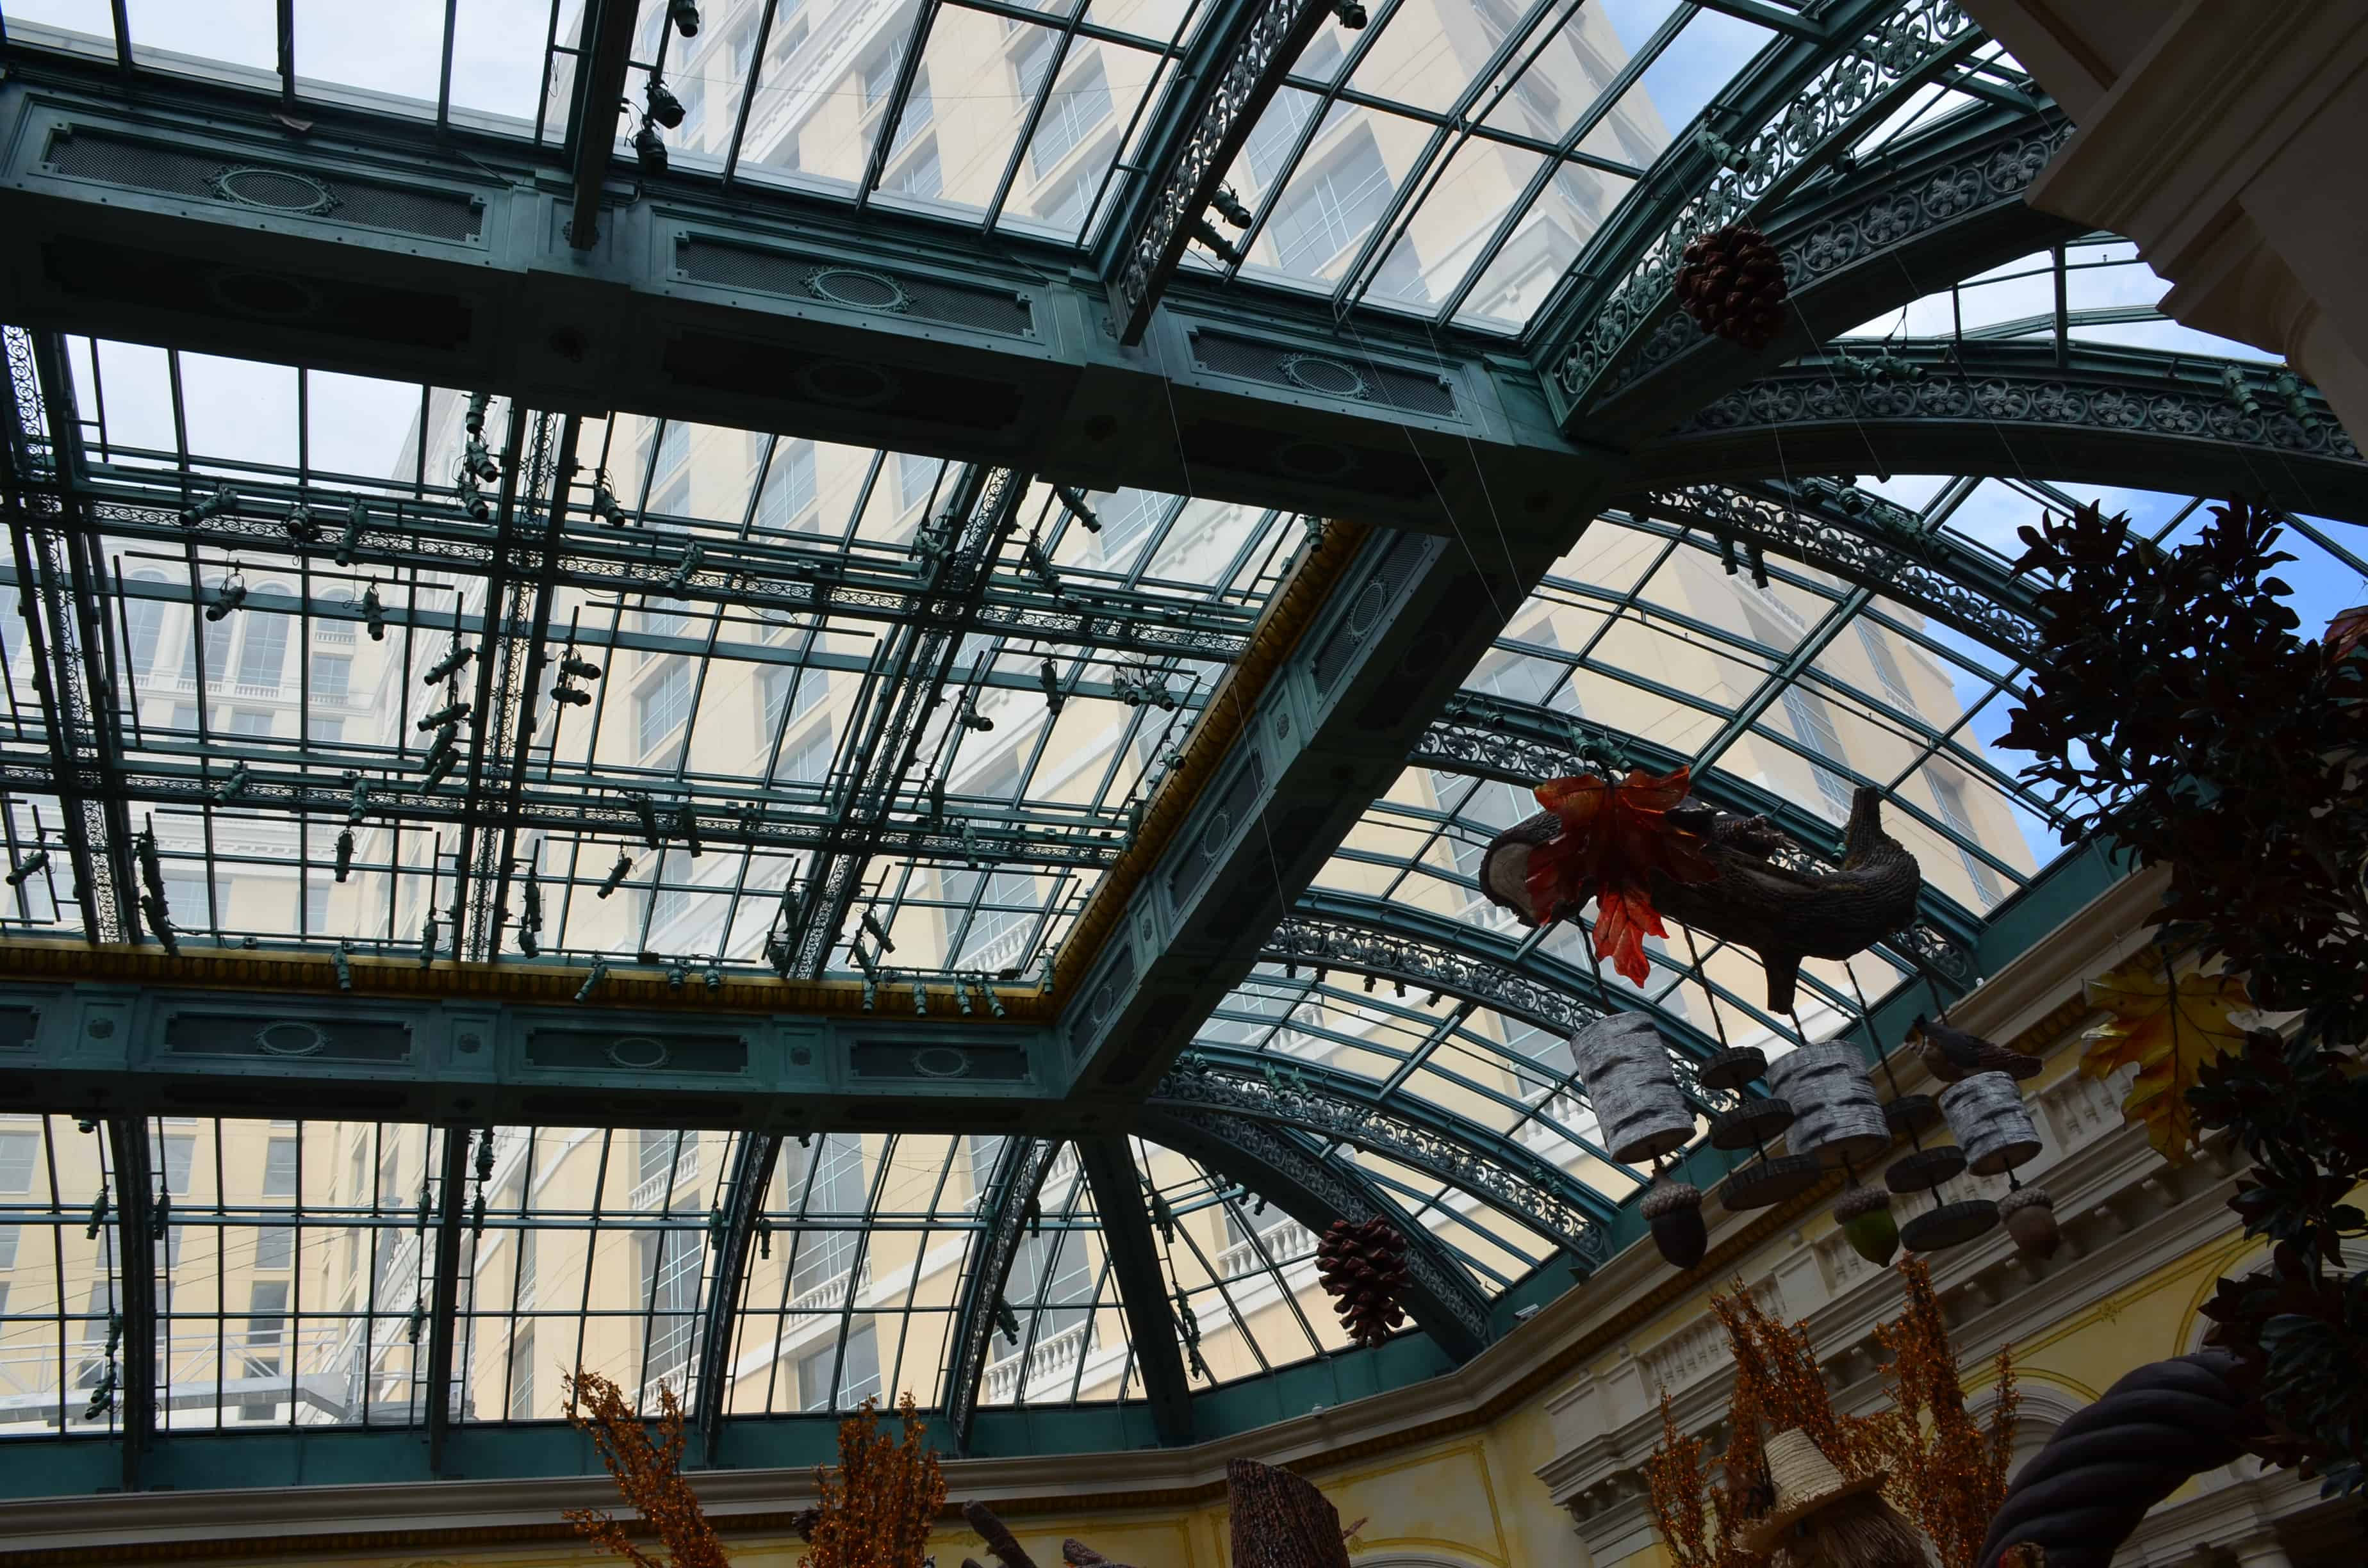 Ceiling of the Conservatory and Botanical Gardens at the Bellagio in Las Vegas, Nevada